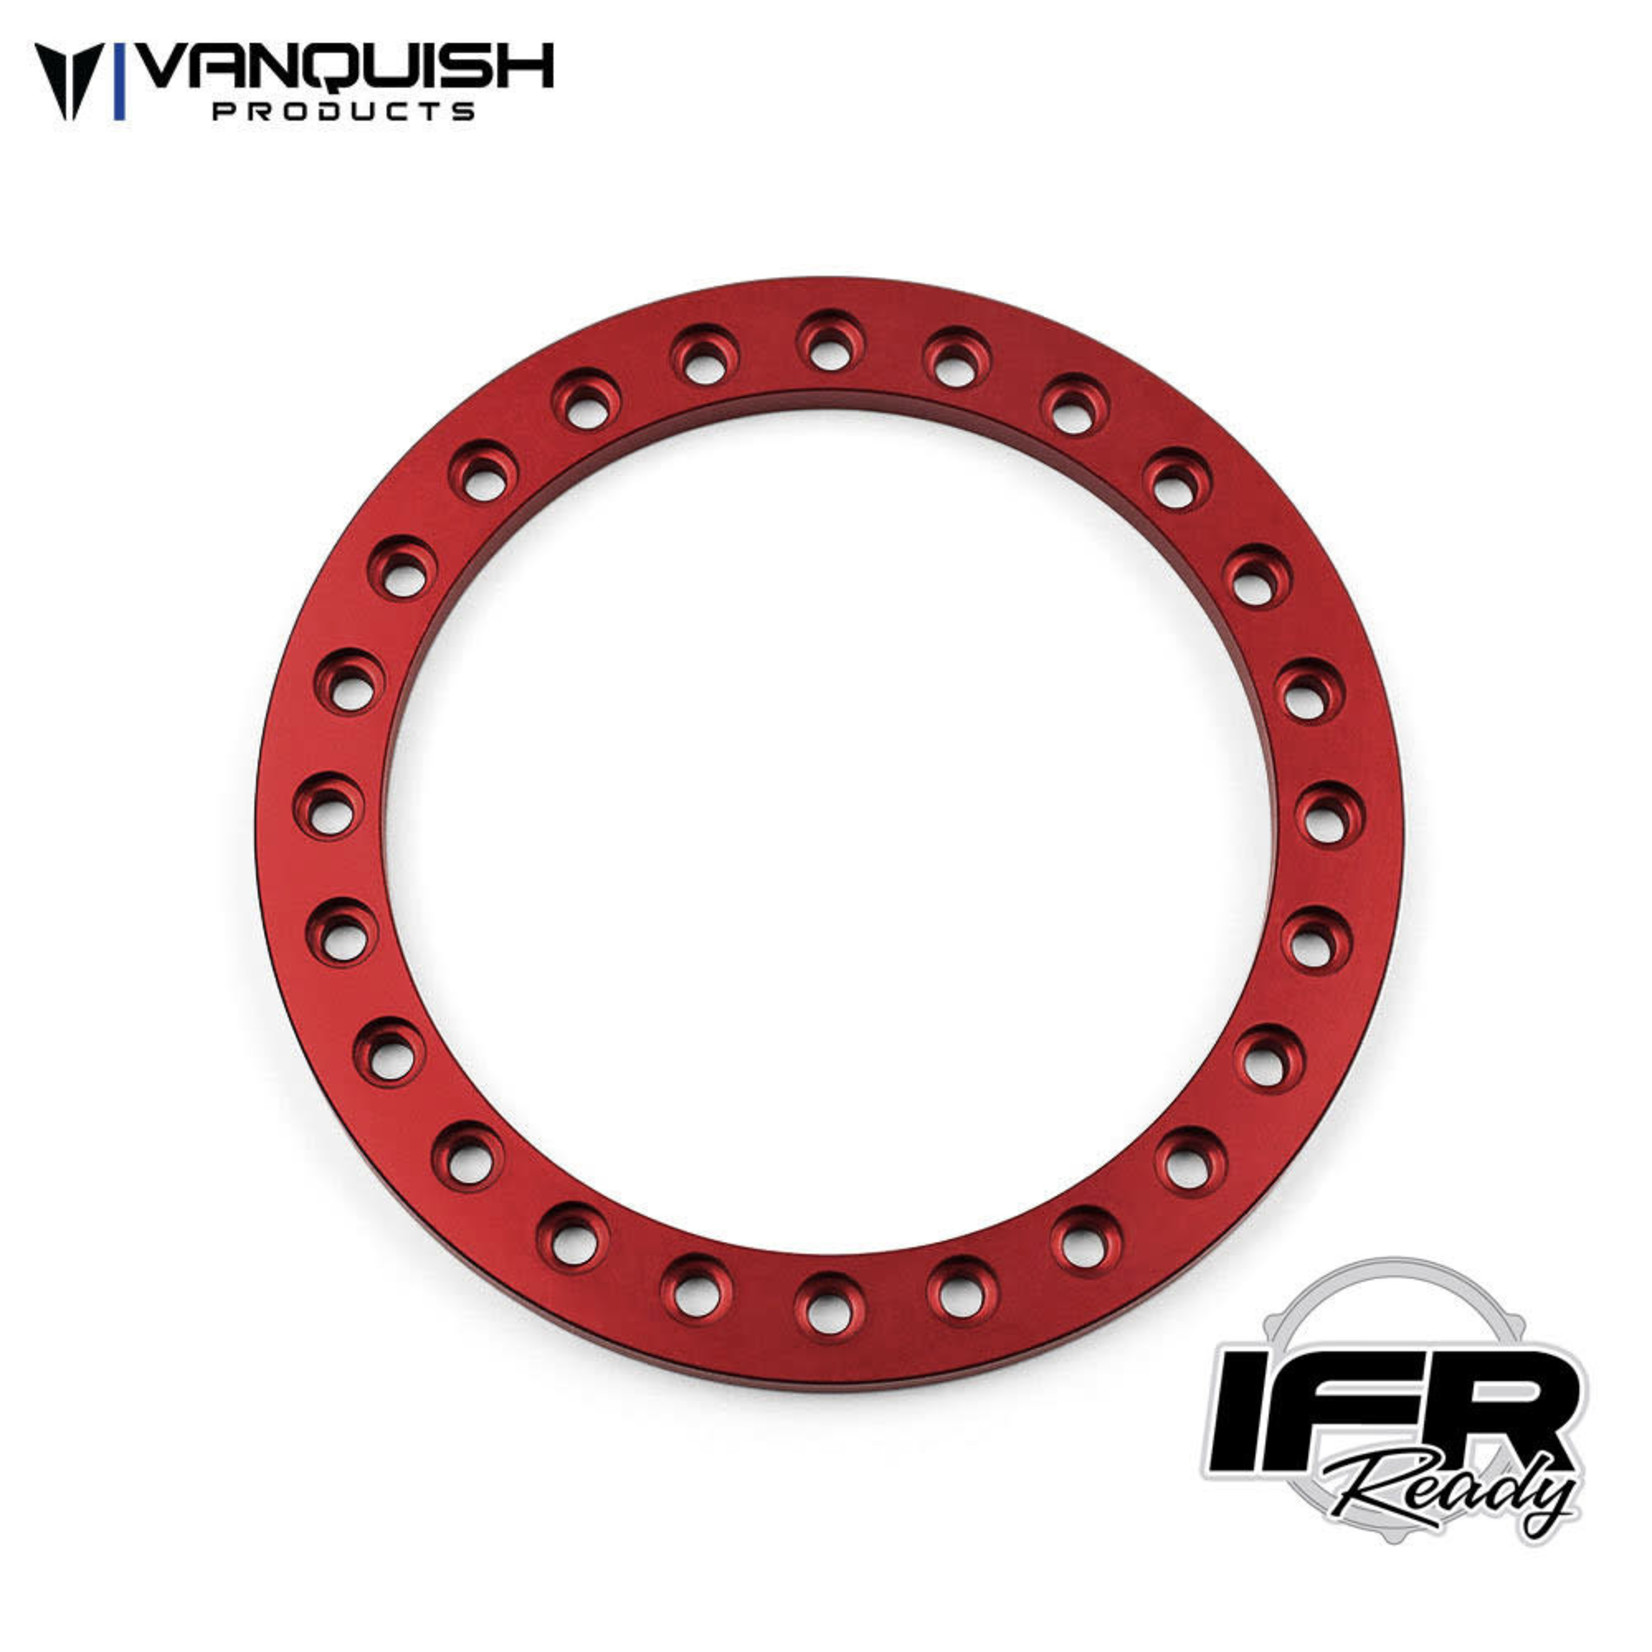 Vanquish Products 1.9 IFR Original Beadlock Ring  Red Anodized (1)